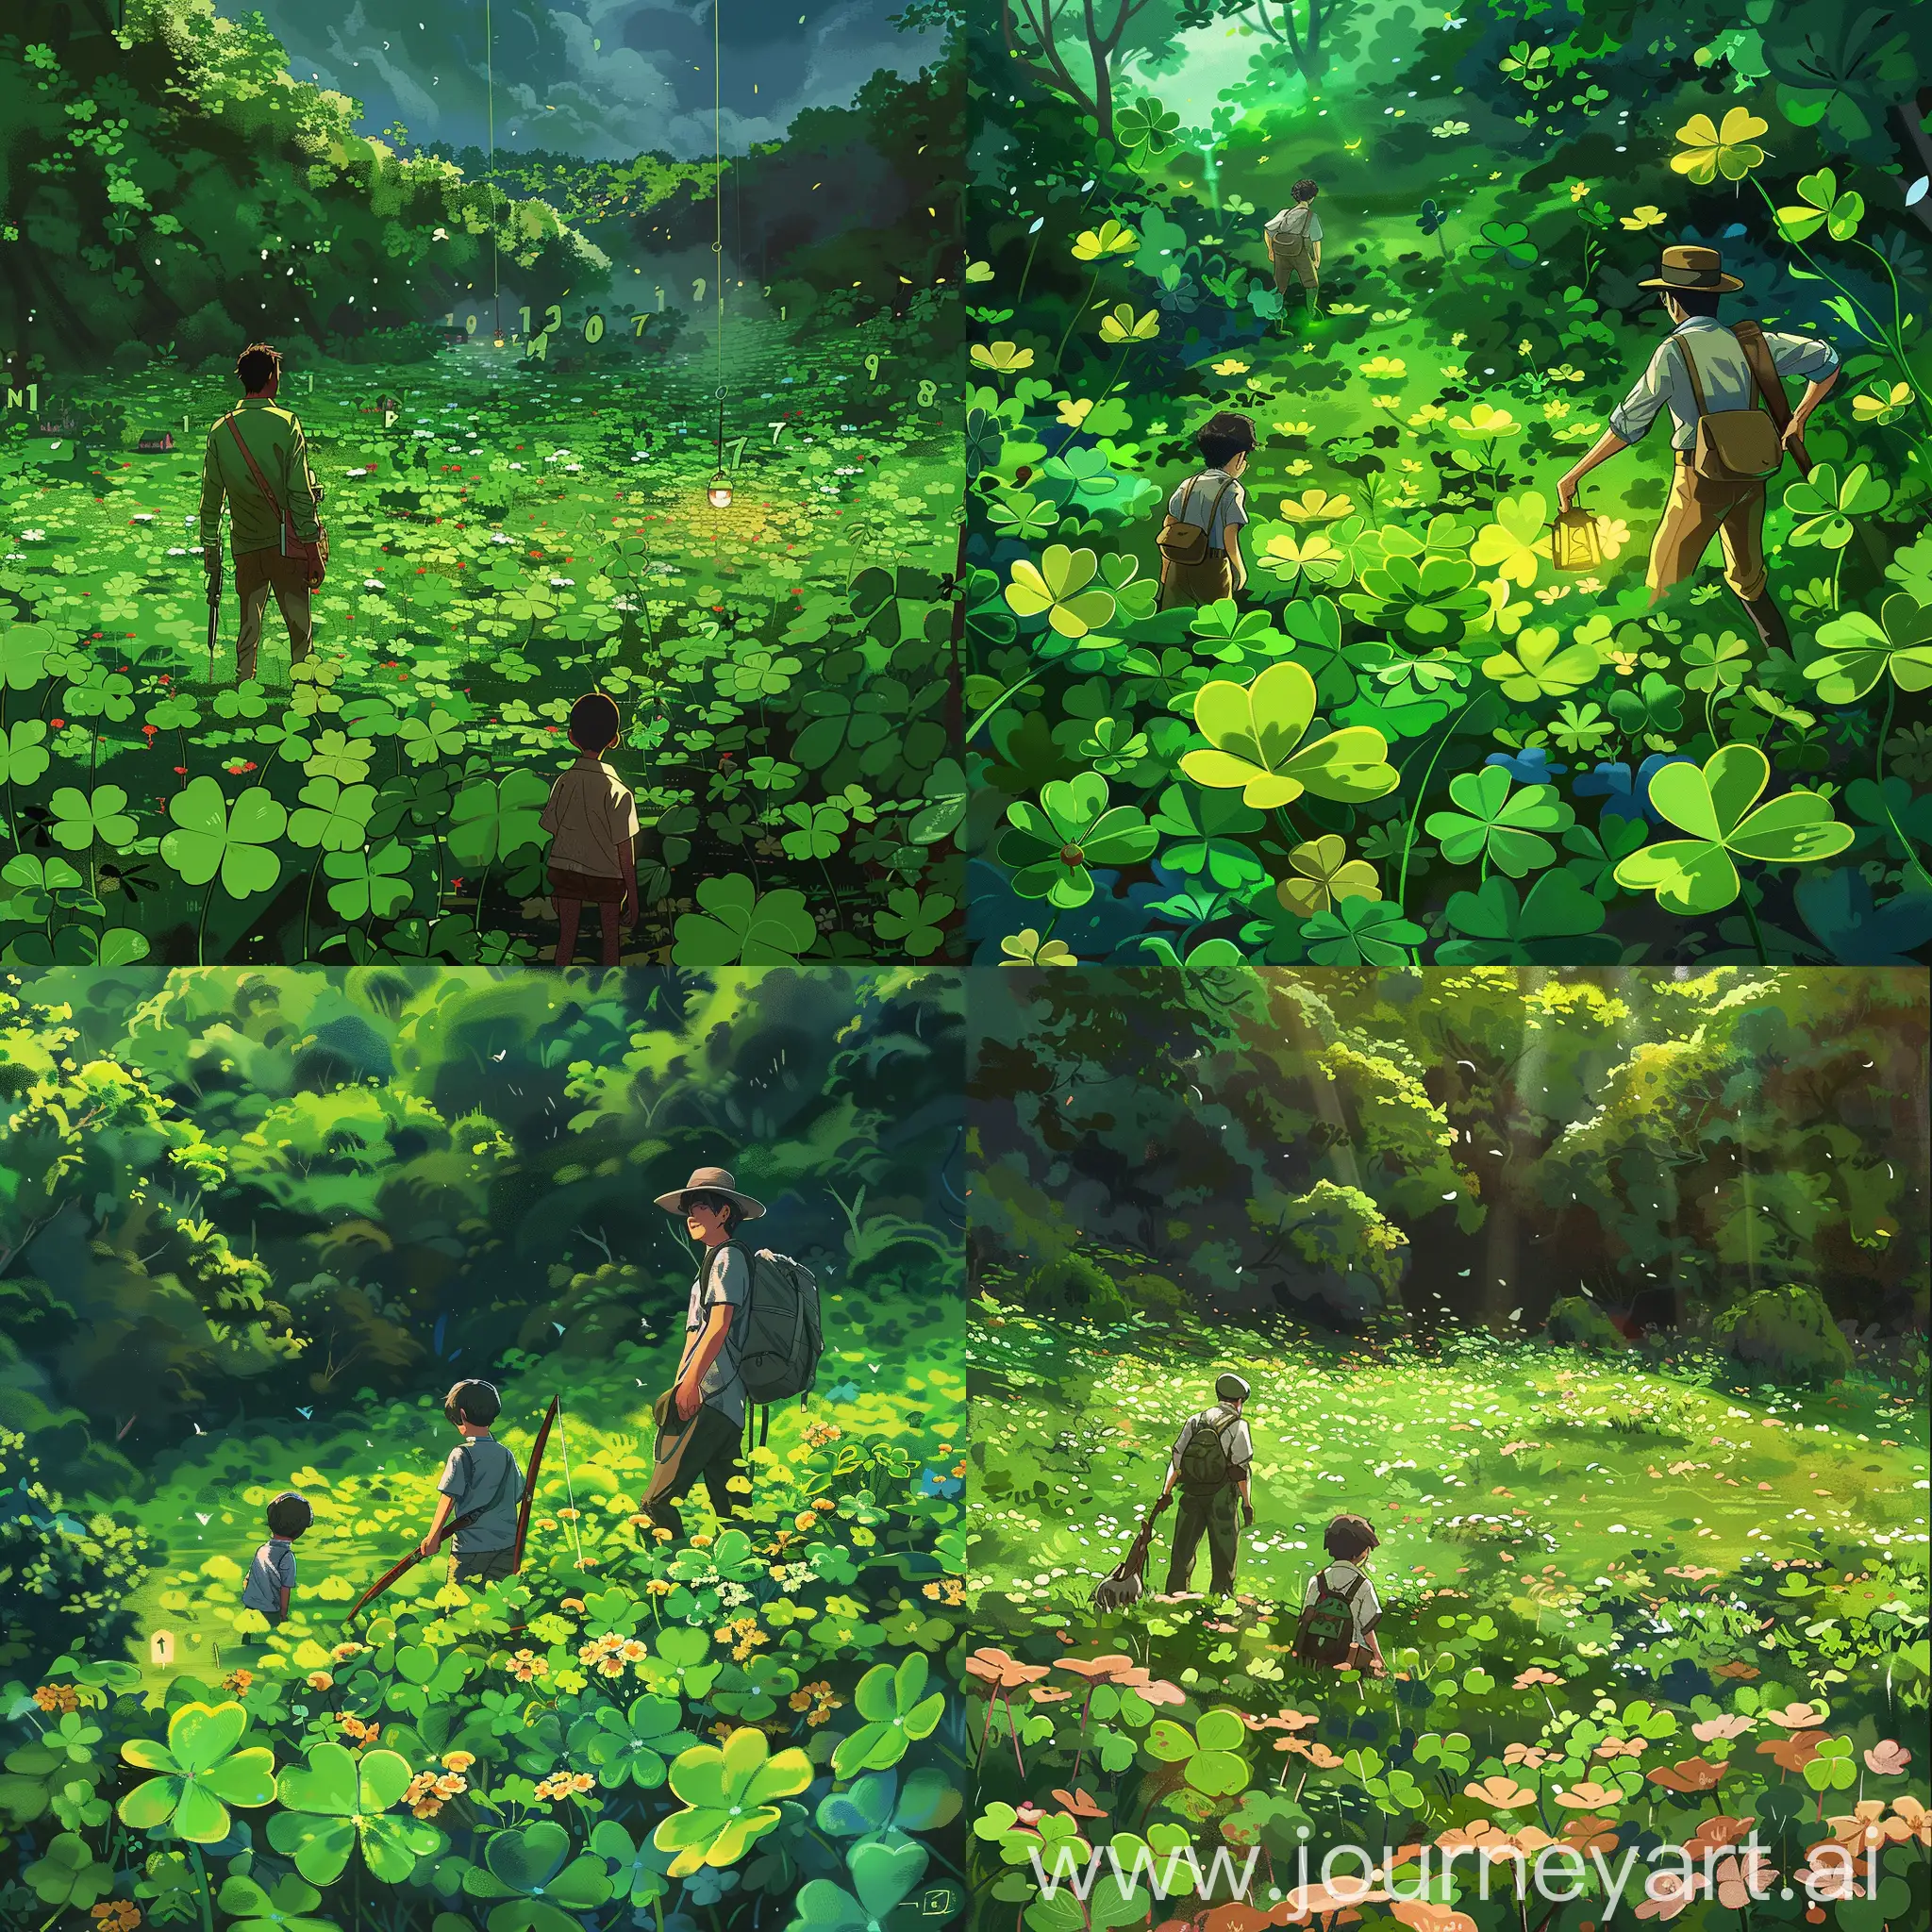 Fantastic exploration world , clover flower fields, japan 1 biologist man, boy 2, hunting, forest, clover flowers flat fields, ((clover flowers lamp light on the numbers tag)), humor, and sense of adventure of the characters on a quest in a vibrant and colorful fantasy setting. The image should have a whimsical, adventurous vibe with vibrant colors, dynamic character designs, and a sense of humor throughout. webtoon style, illustration